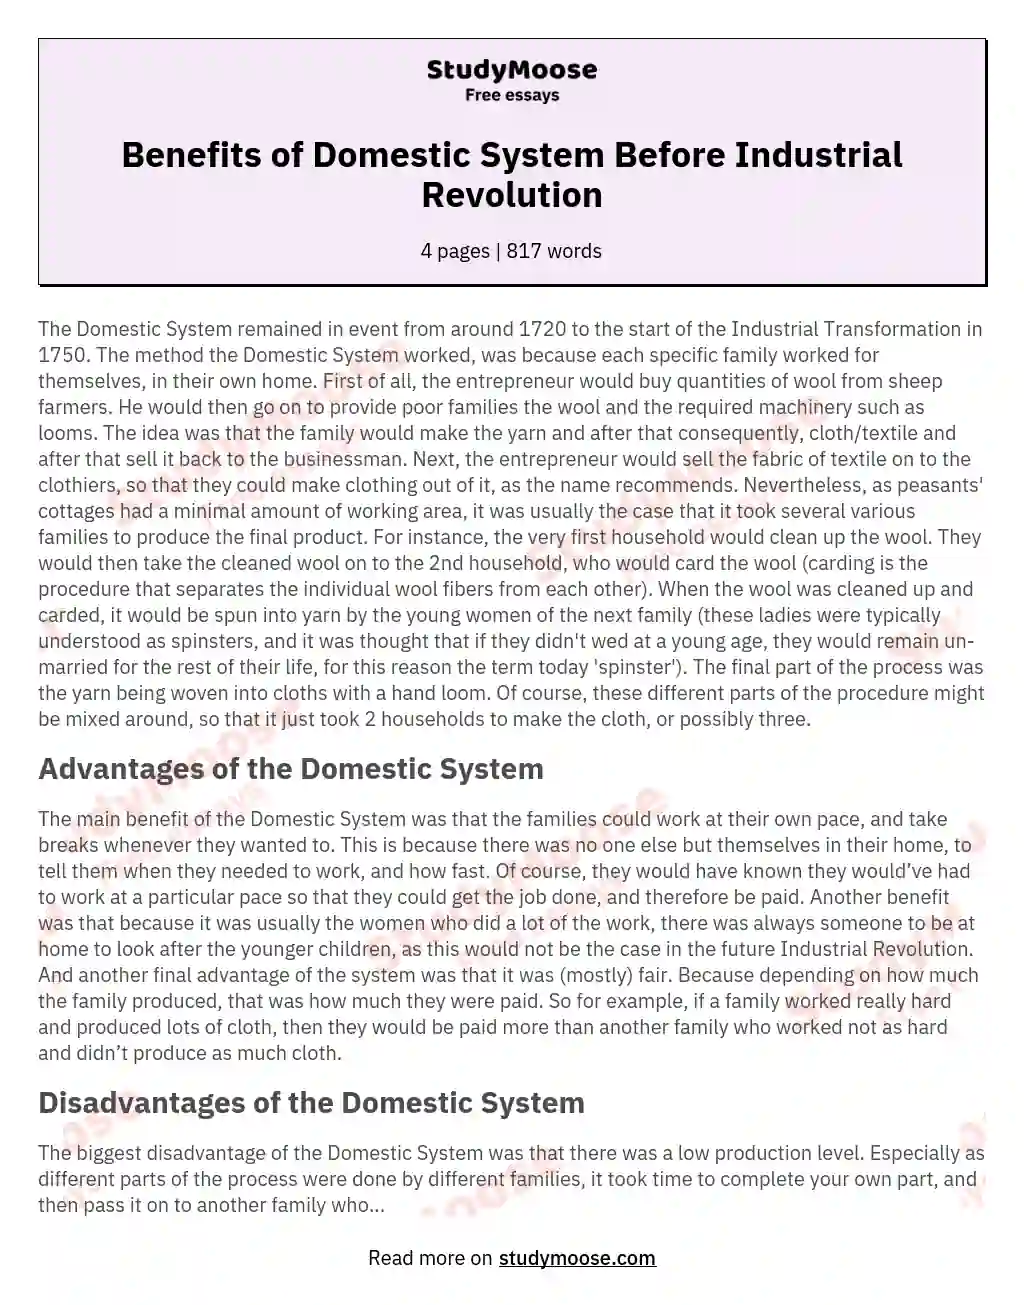 Benefits of Domestic System Before Industrial Revolution essay